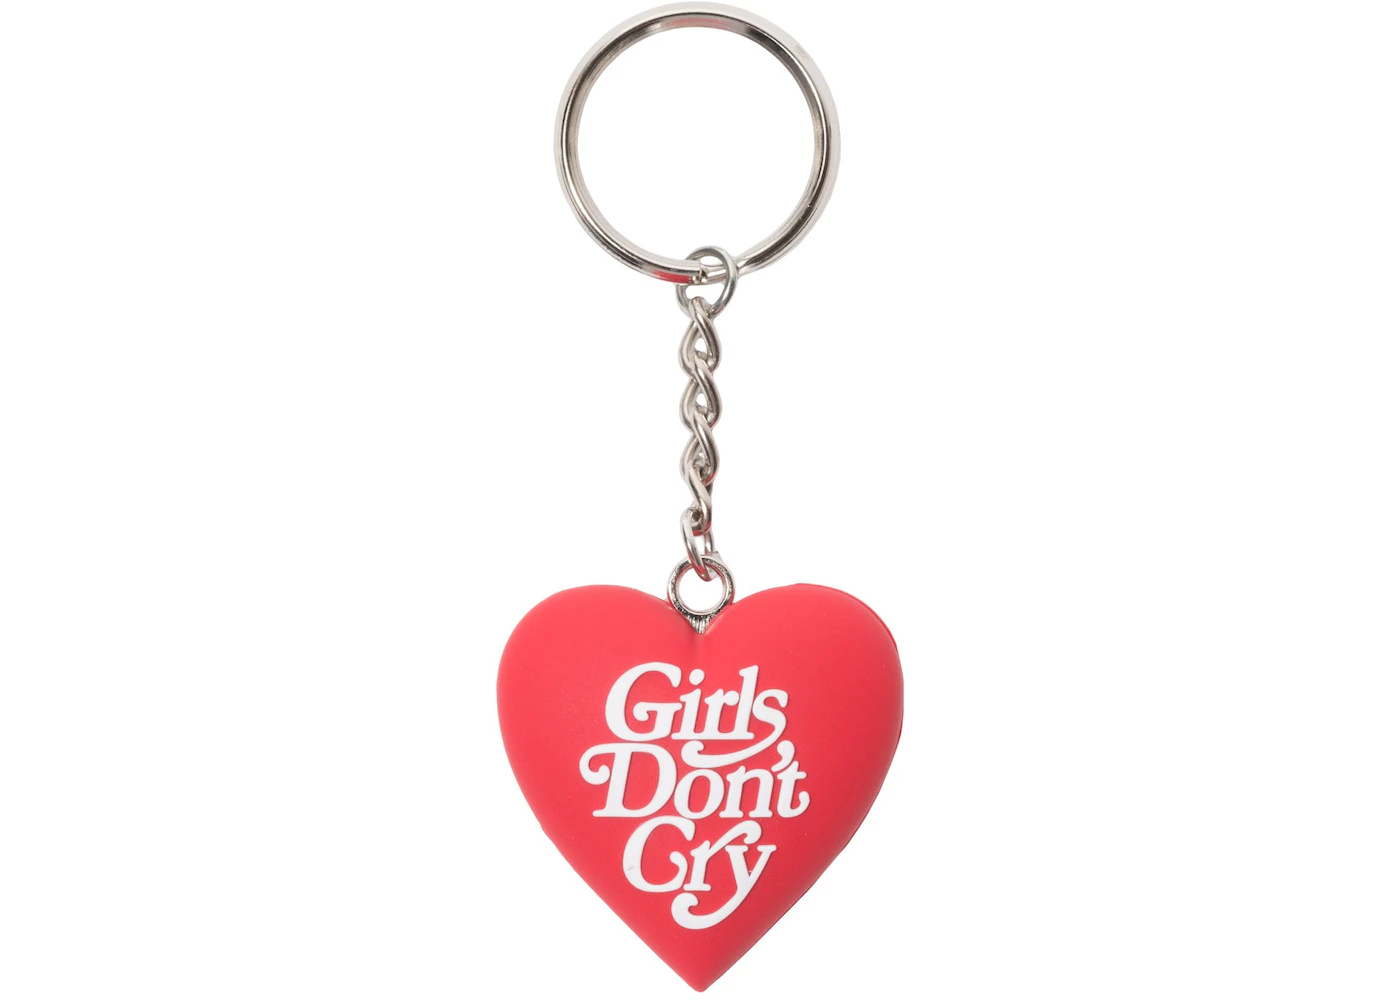 Girls Don't Cry Heart Keychain Red